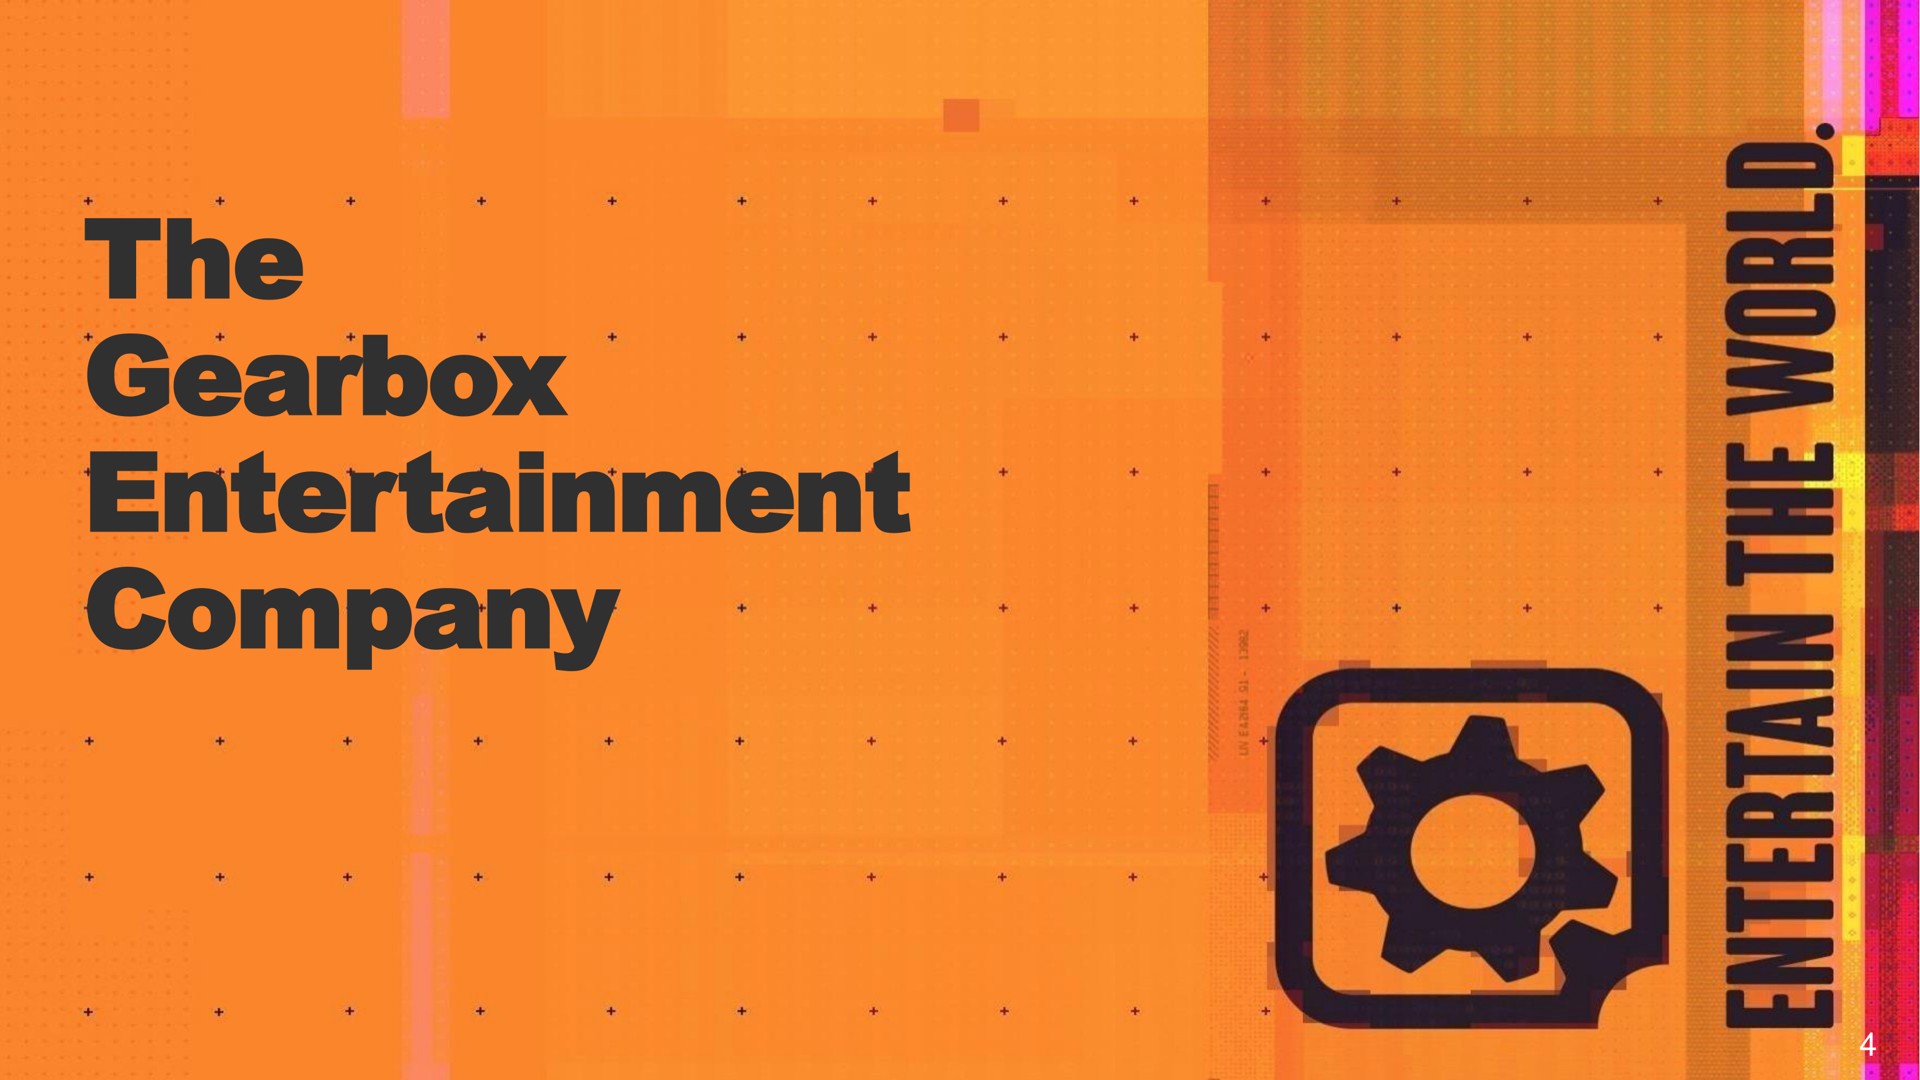 the gearbox entertainment company | Embracer Group